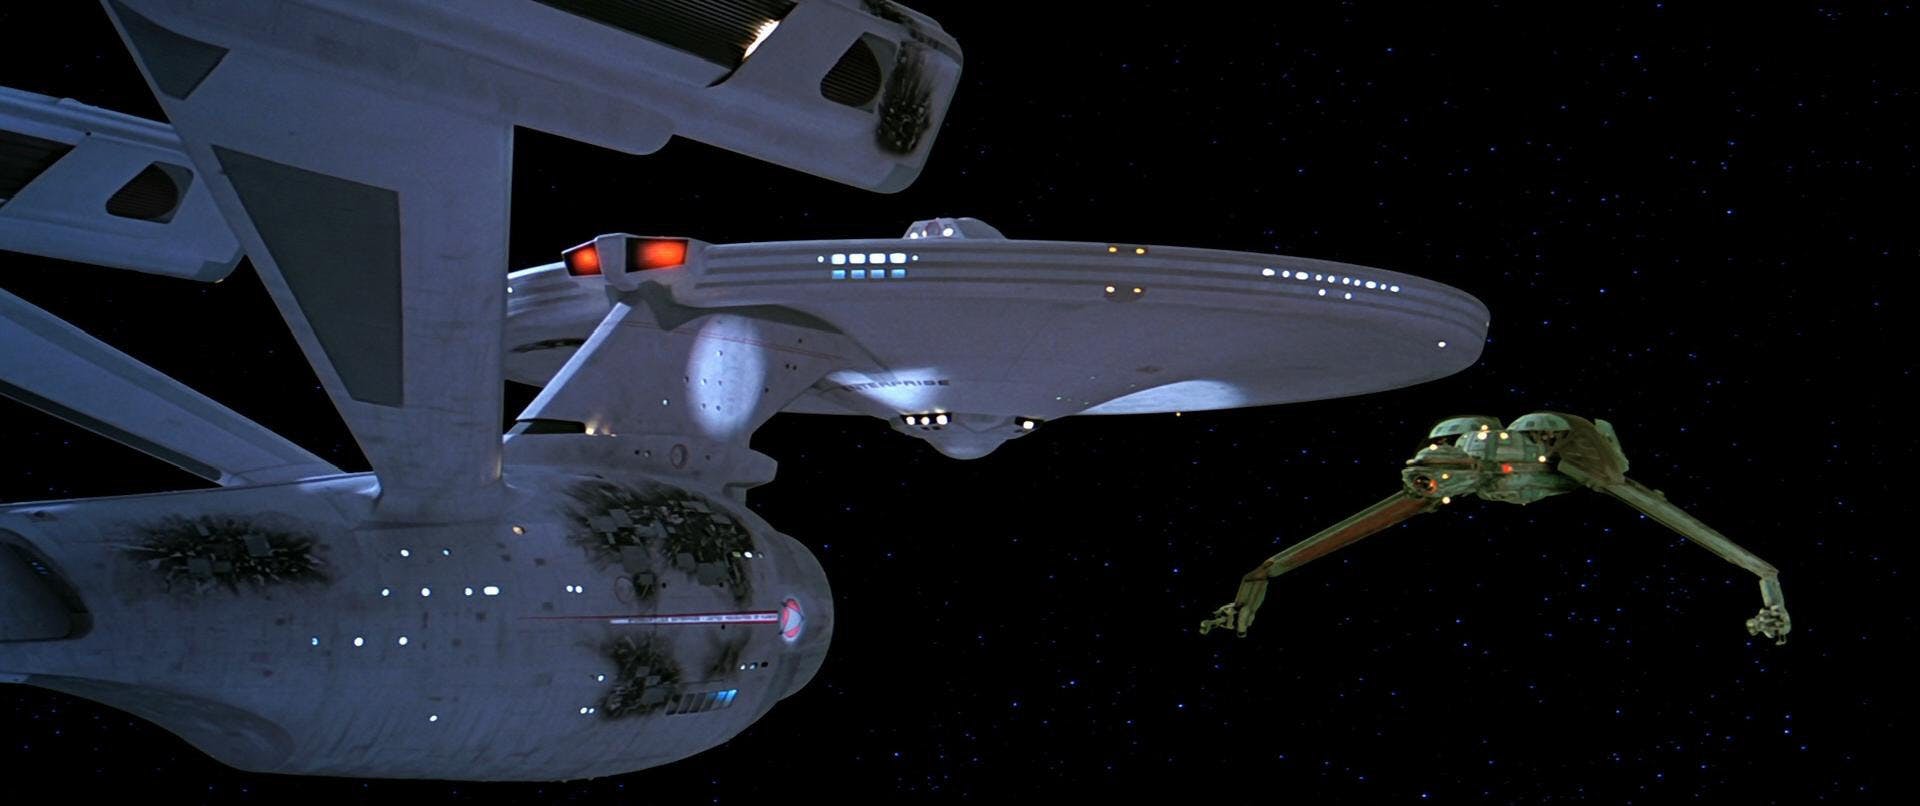 A battered Enterprise faces the Klingon Bird-of-Prey in Star Trek III: The Search for Spock